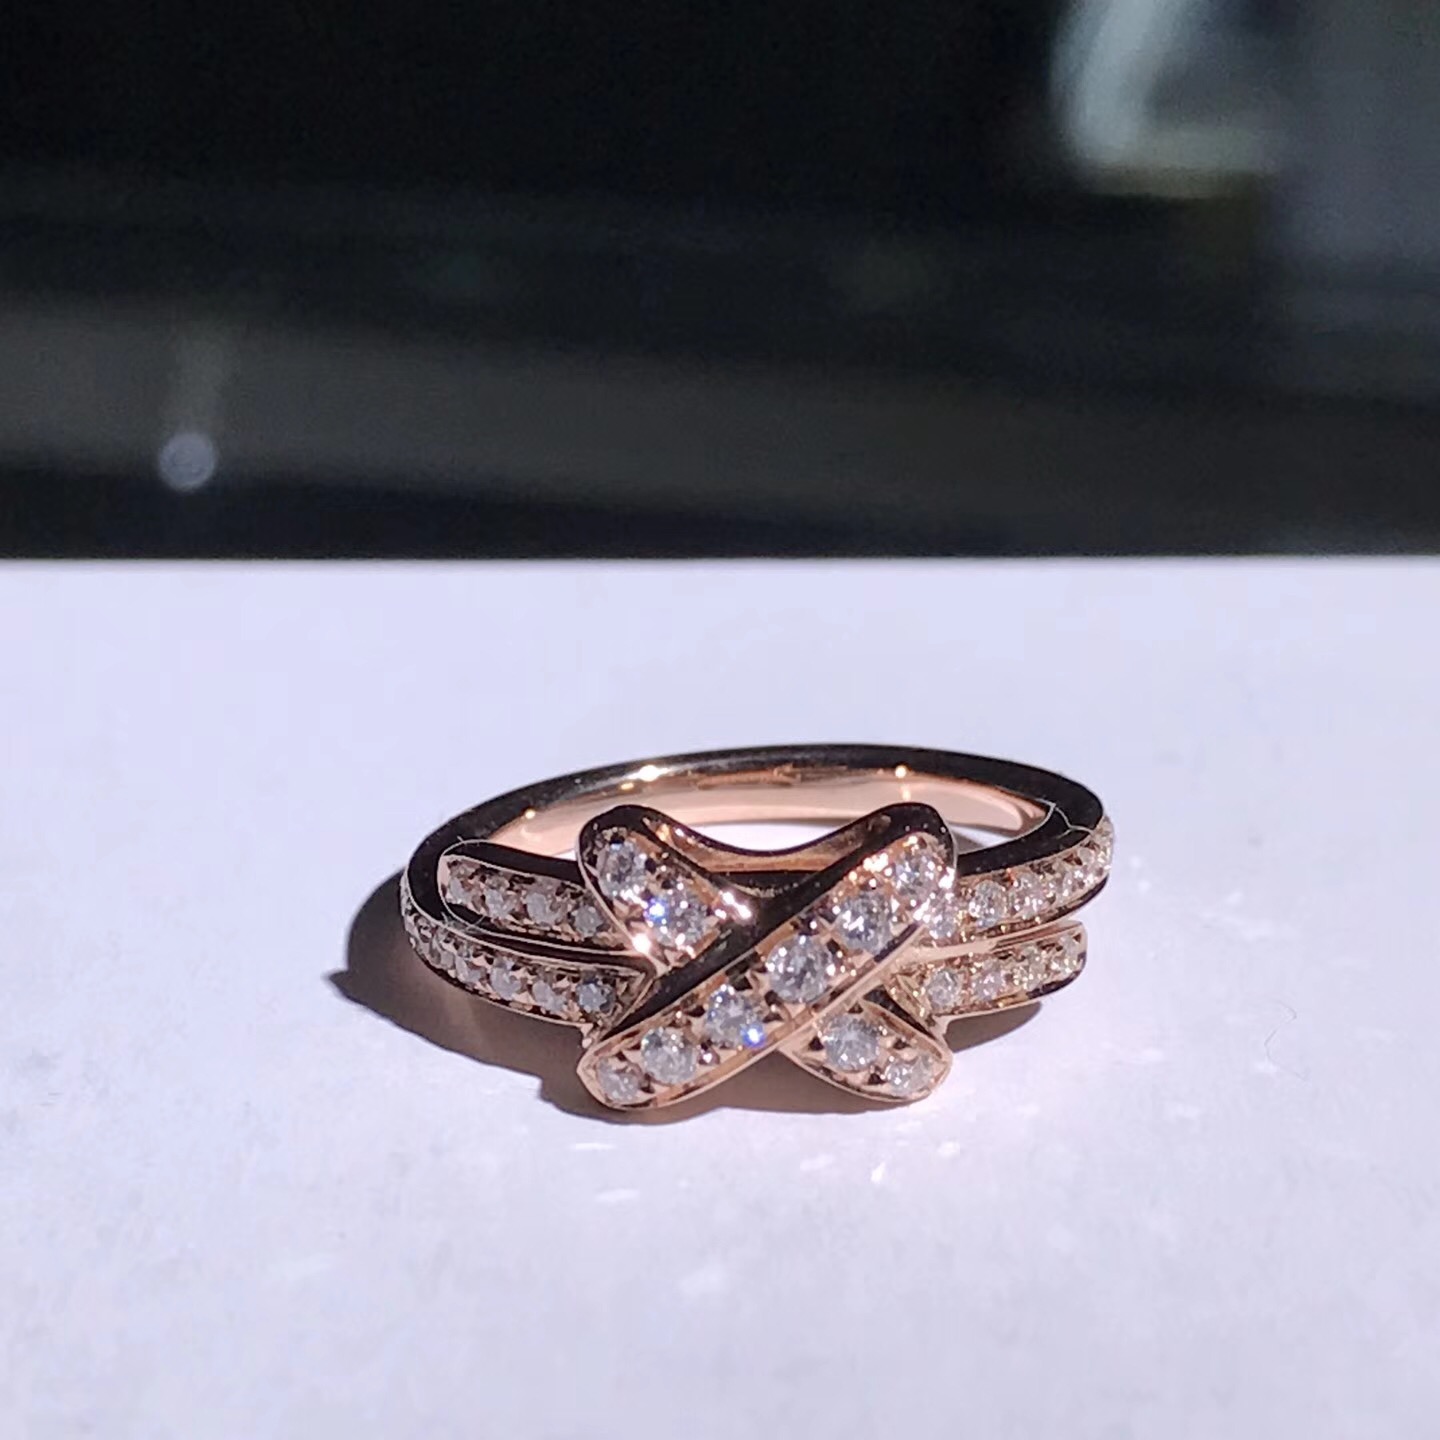 Liens de Chaumet Premiers Liens ring in 18k pink gold with pave diamond